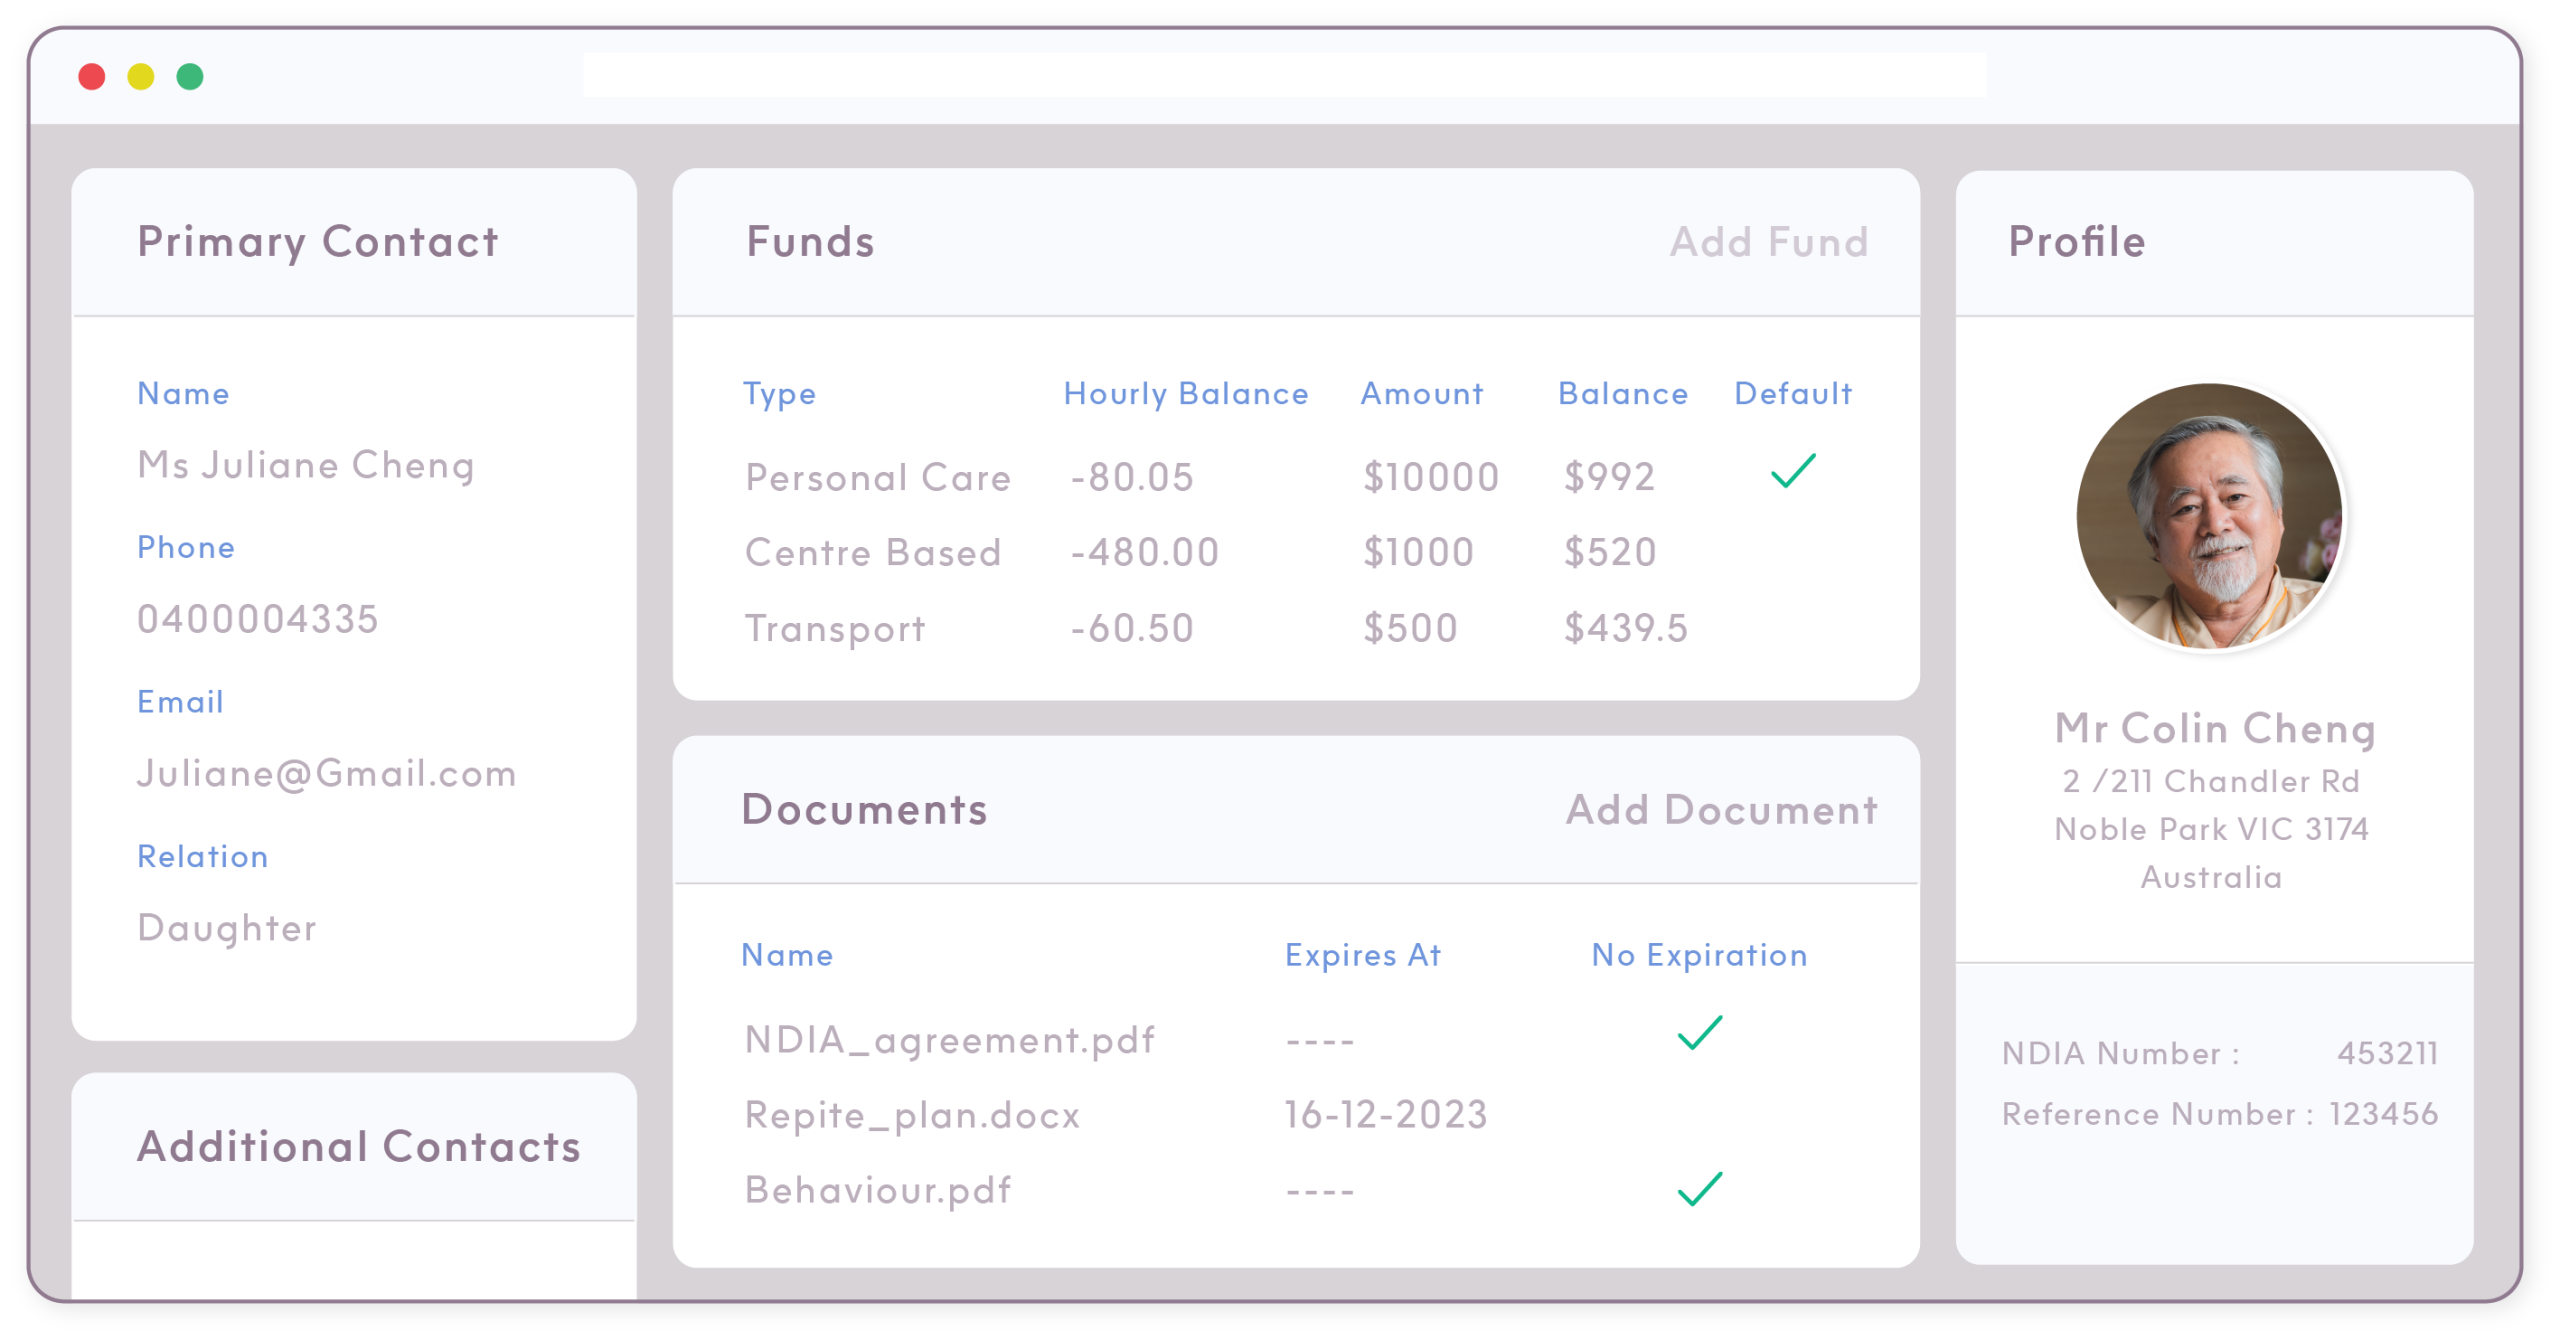 Client profile on ShiftCare showing available funds, documents, contact details, and address